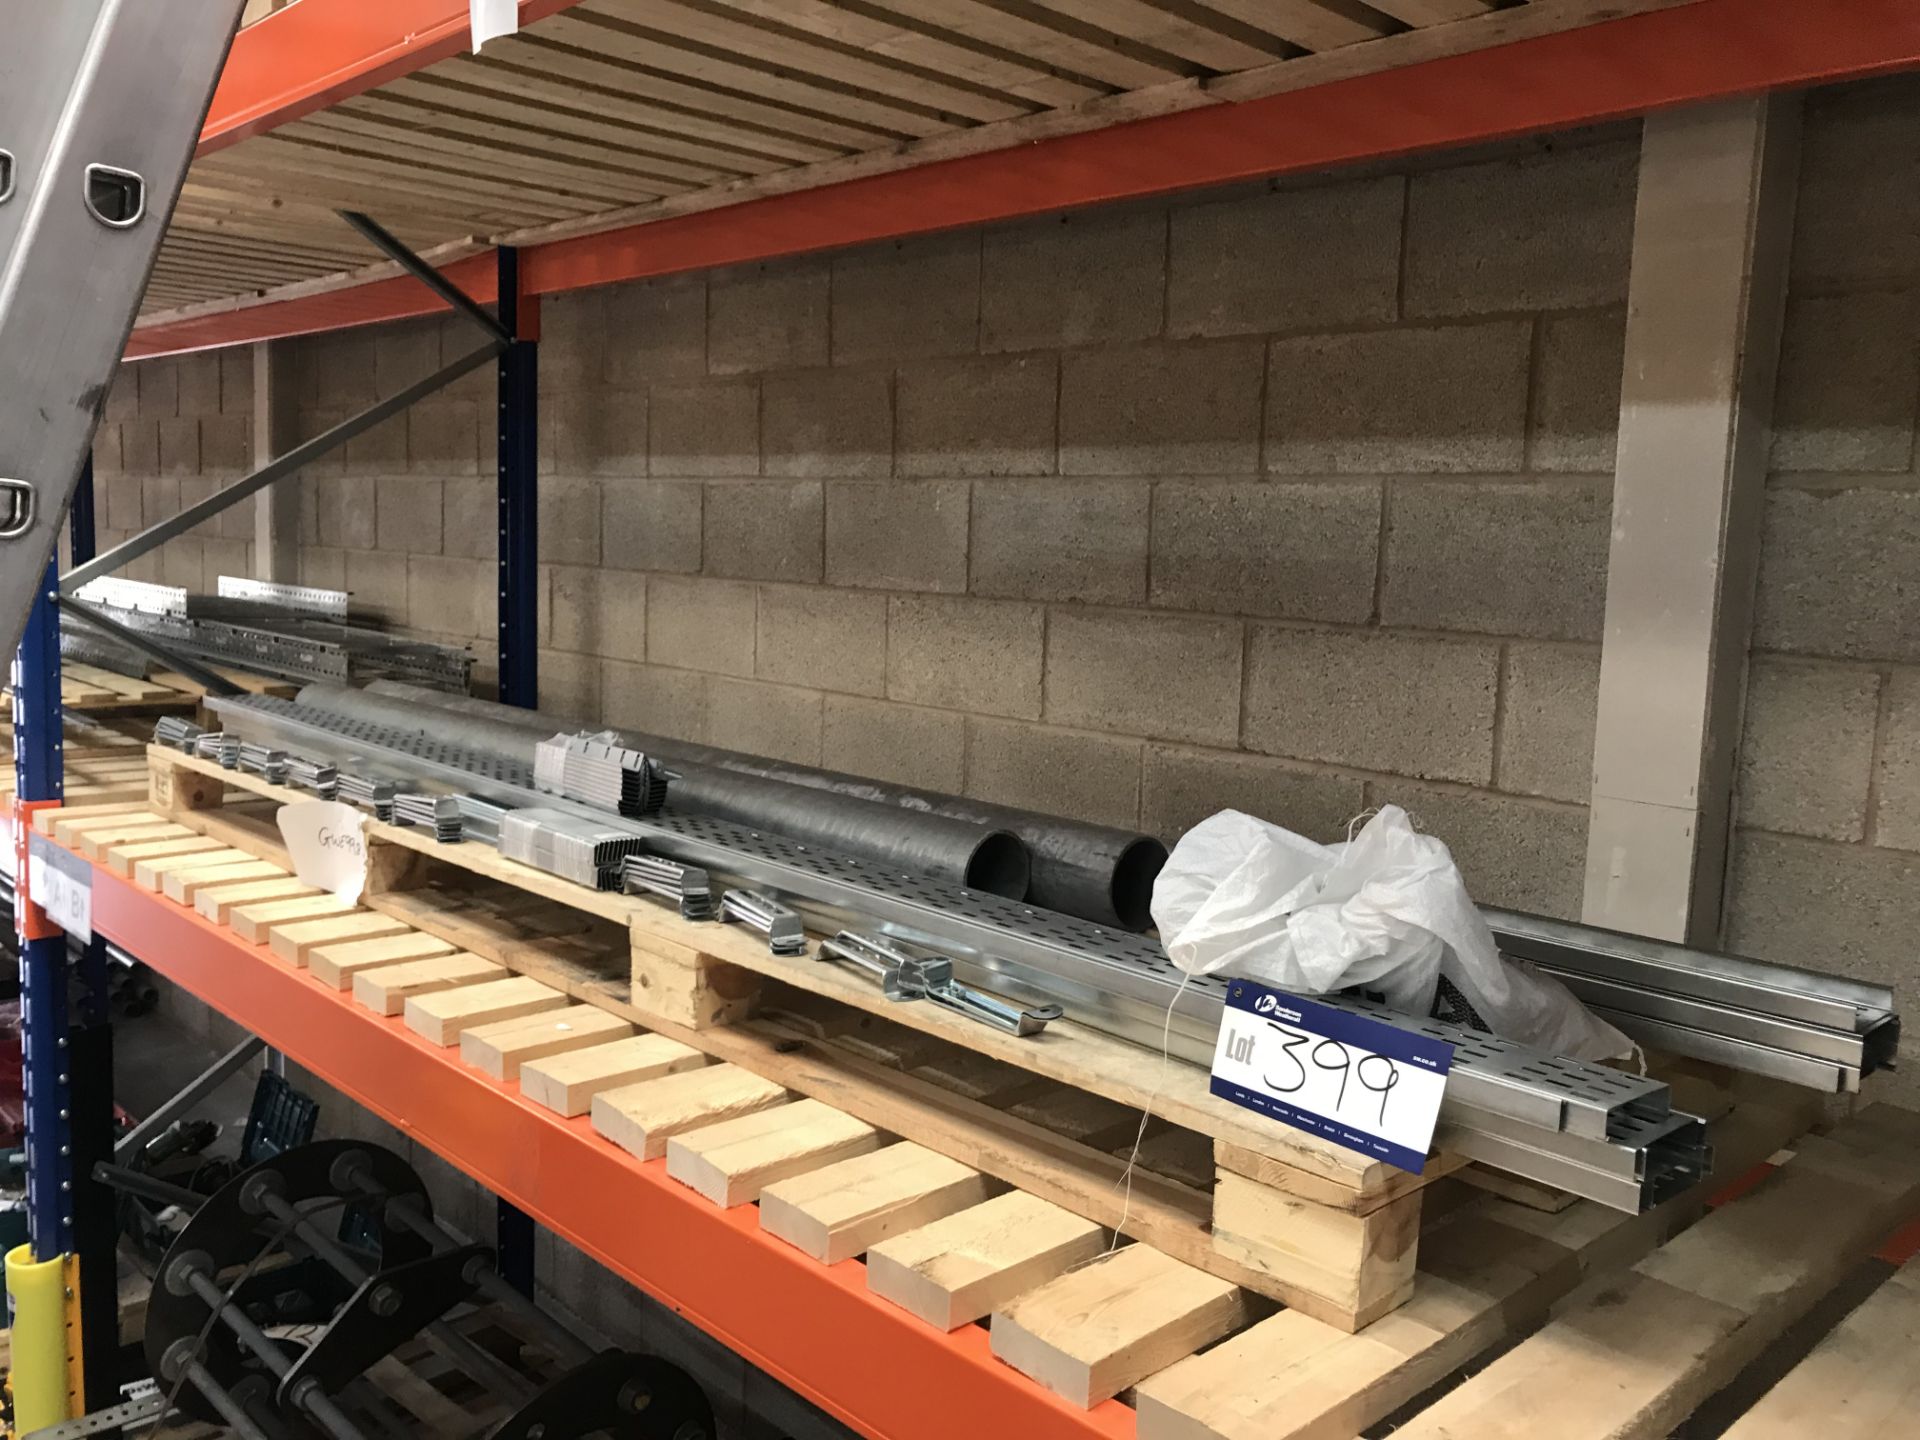 Quantity of Galvanised Cable Trunking and Poles as set out on 1 large pallet